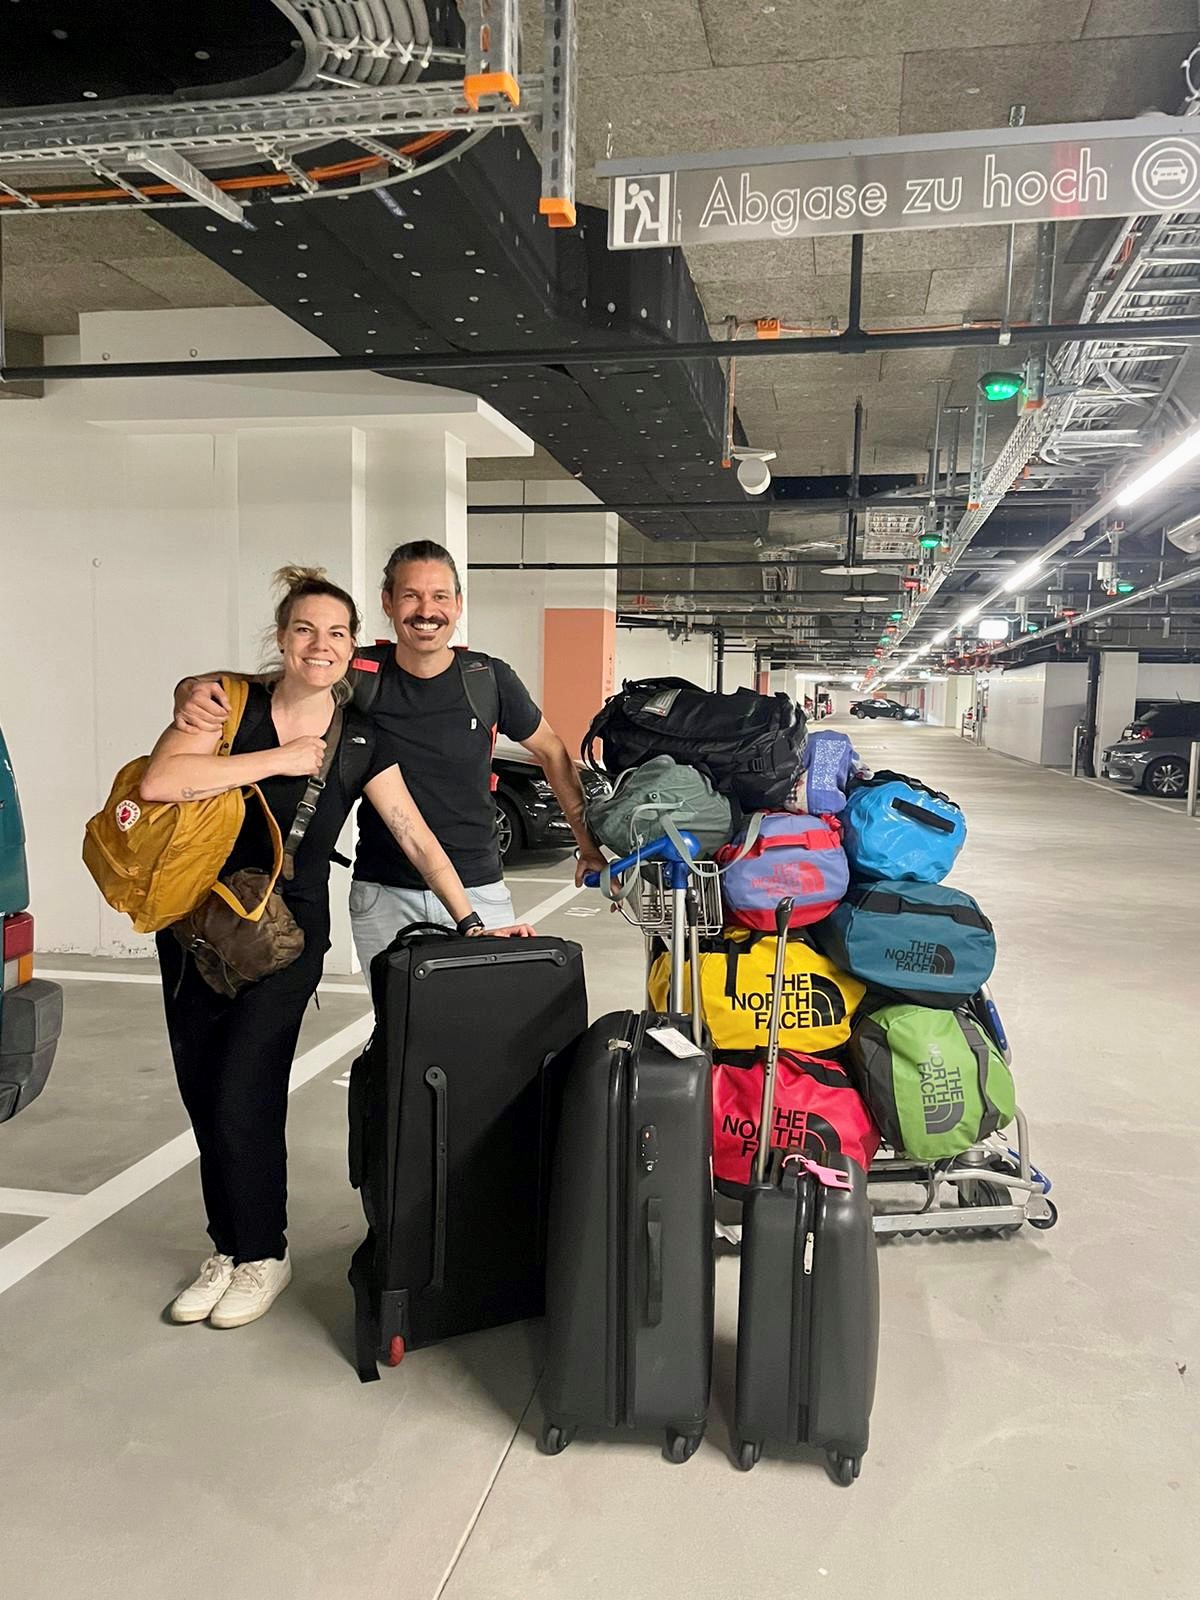 Stephanie and Marius Karrer at the airport with lots of luggage